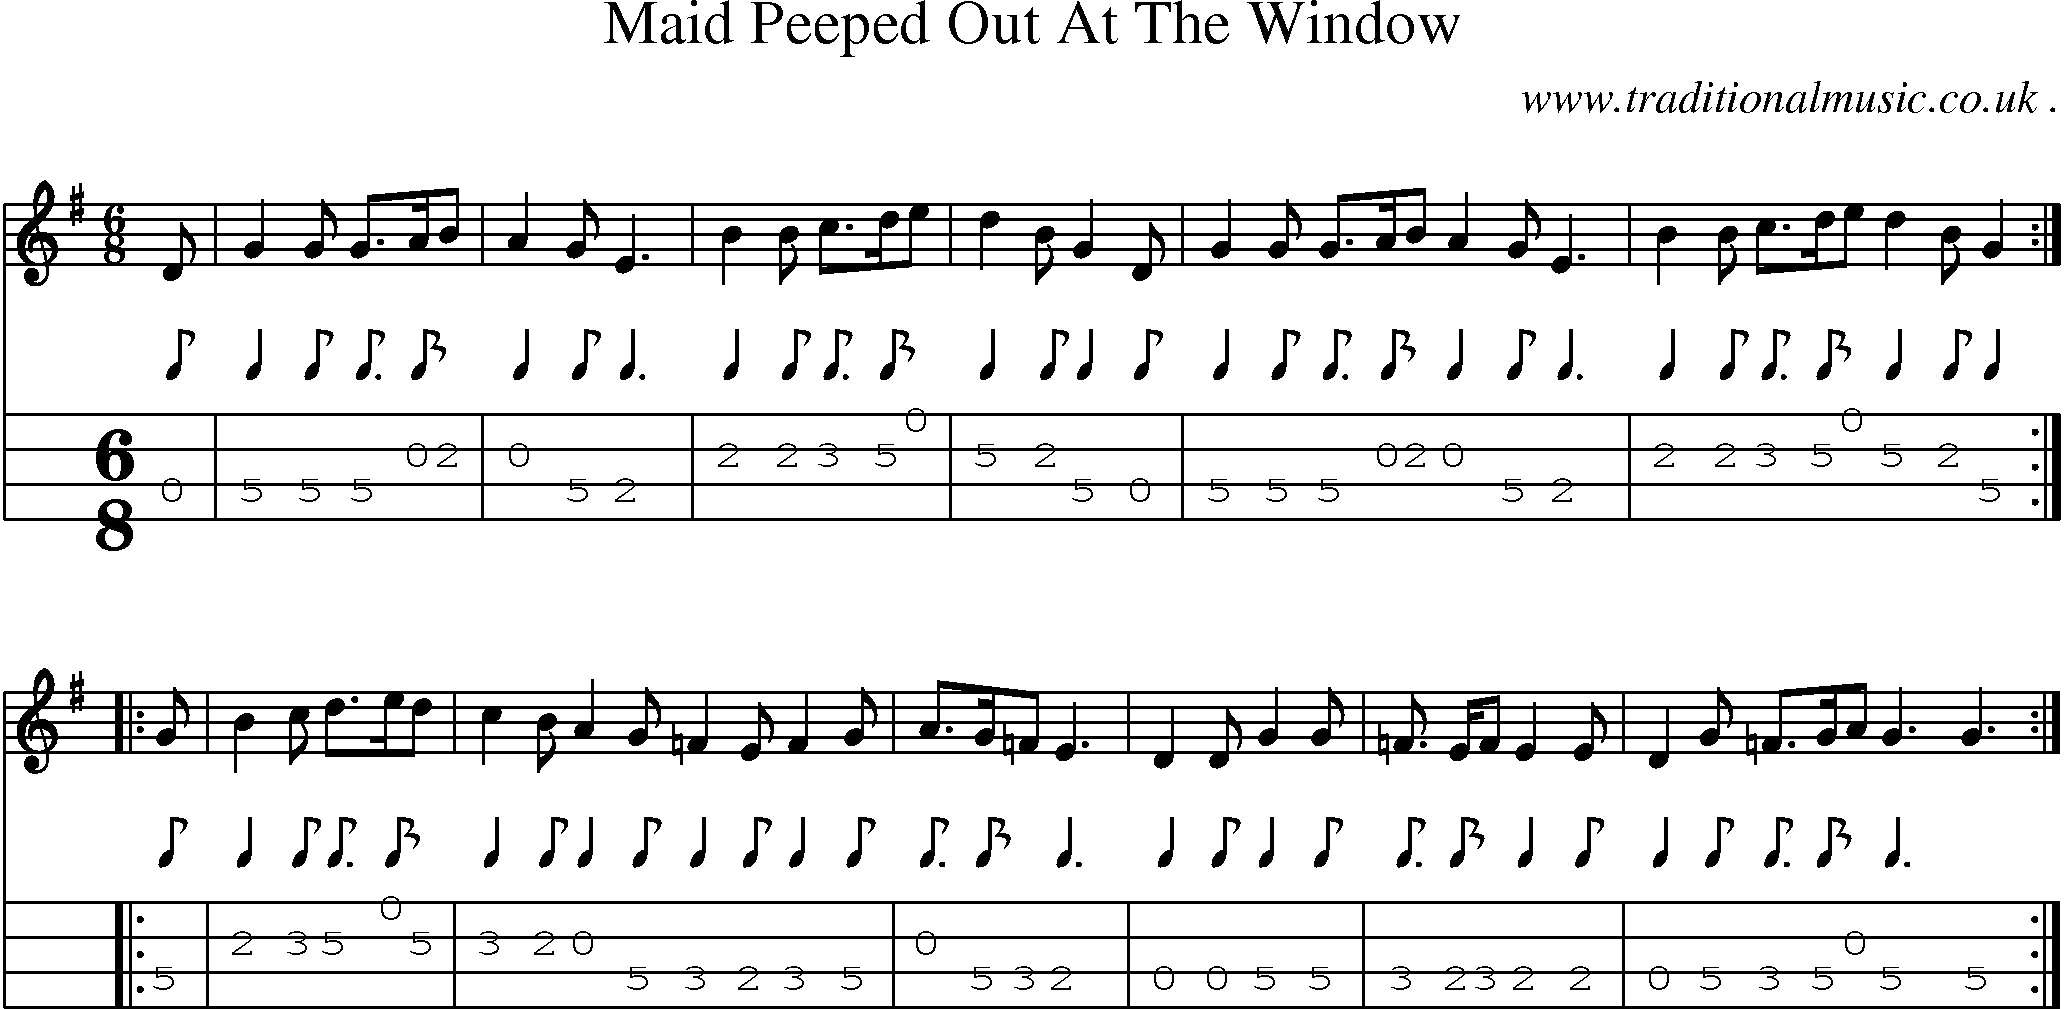 Sheet-Music and Mandolin Tabs for Maid Peeped Out At The Window